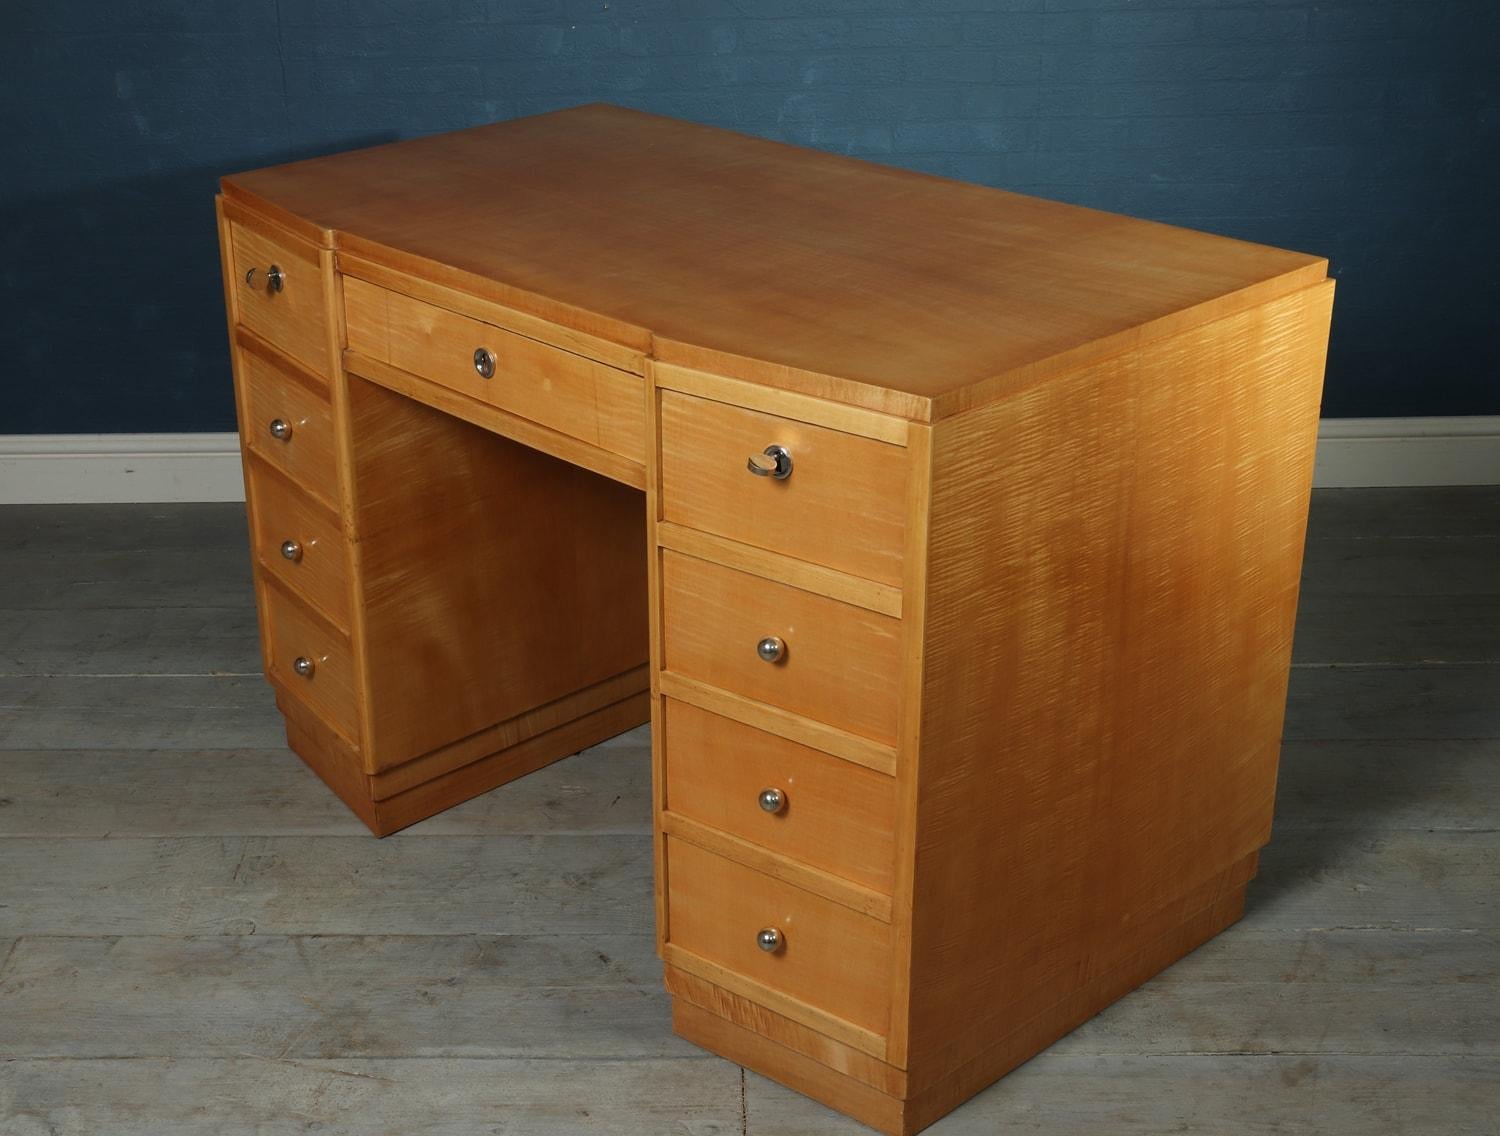 French Art Deco desk in sycamore, circa 1930

A French 9 drawer sycamore desk produced in the 1930s, three lockable top drawers and all running smoothly fully polished and restored with a few age related marks
Age: 1930
Style: Art